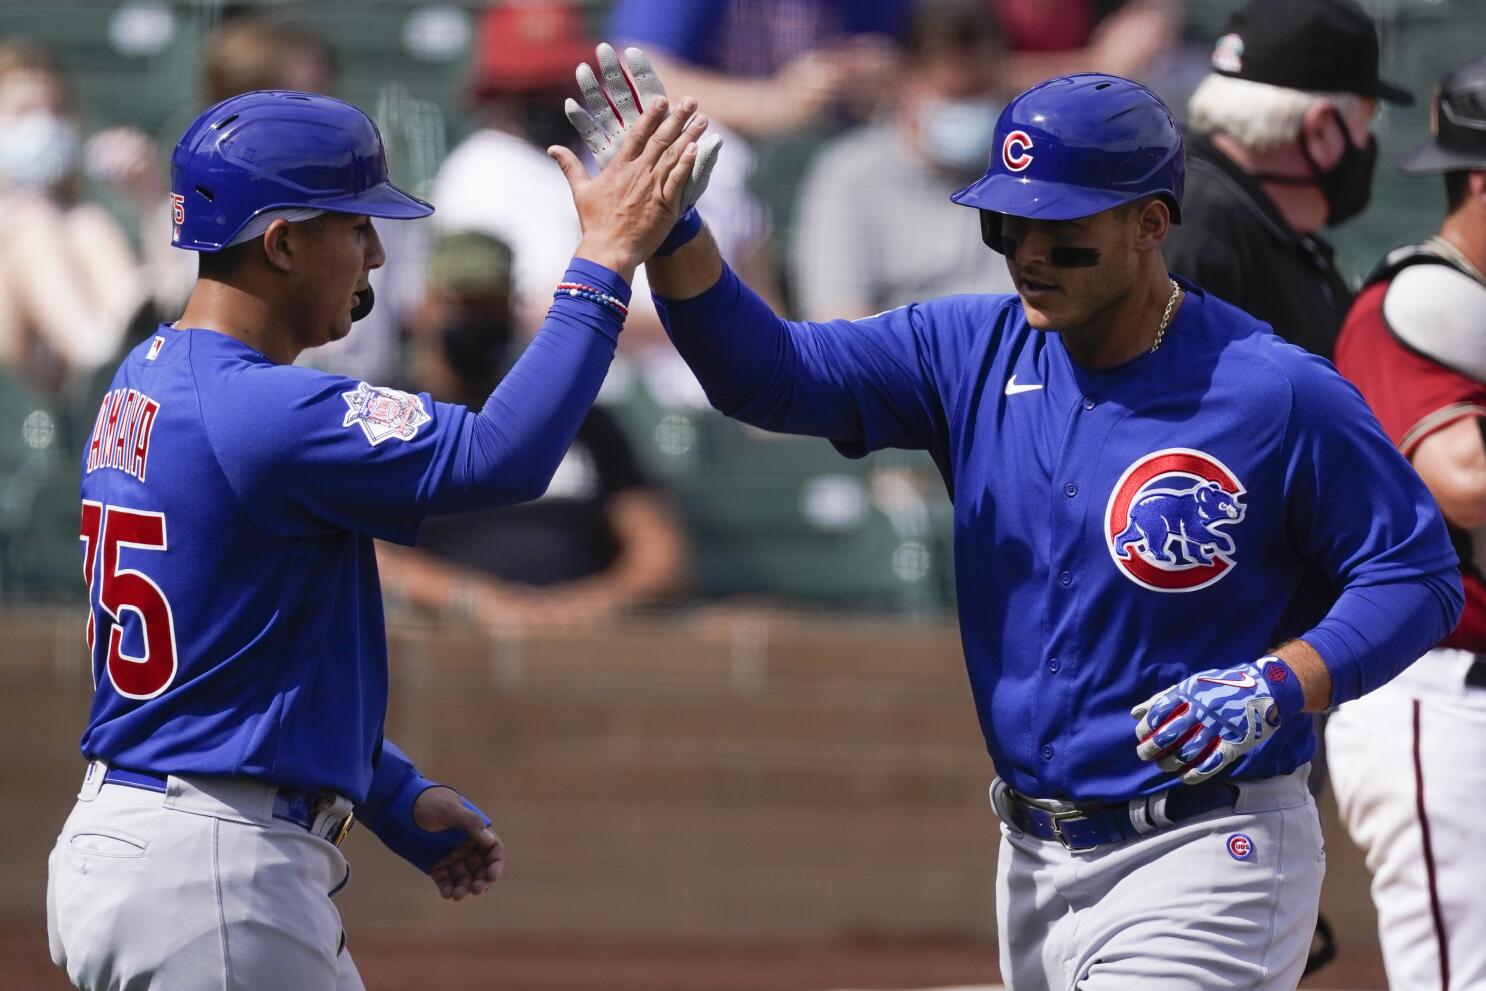 David Ross, Chicago Cubs hope to build on strong 2nd half